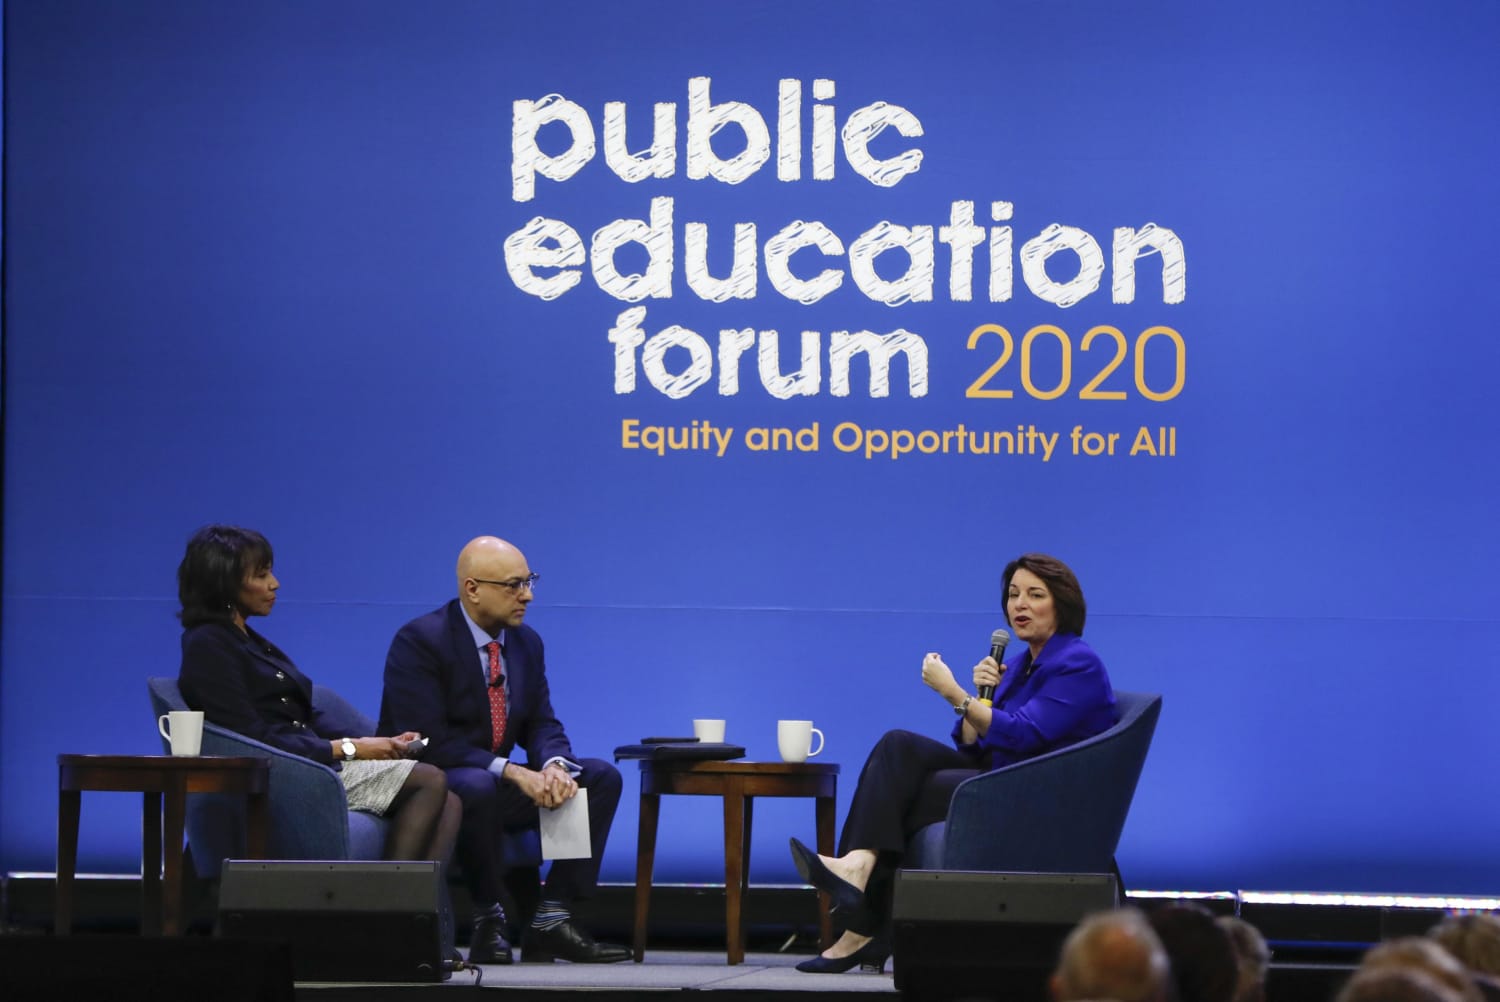 2020 Presidential Candidates on Higher Ed